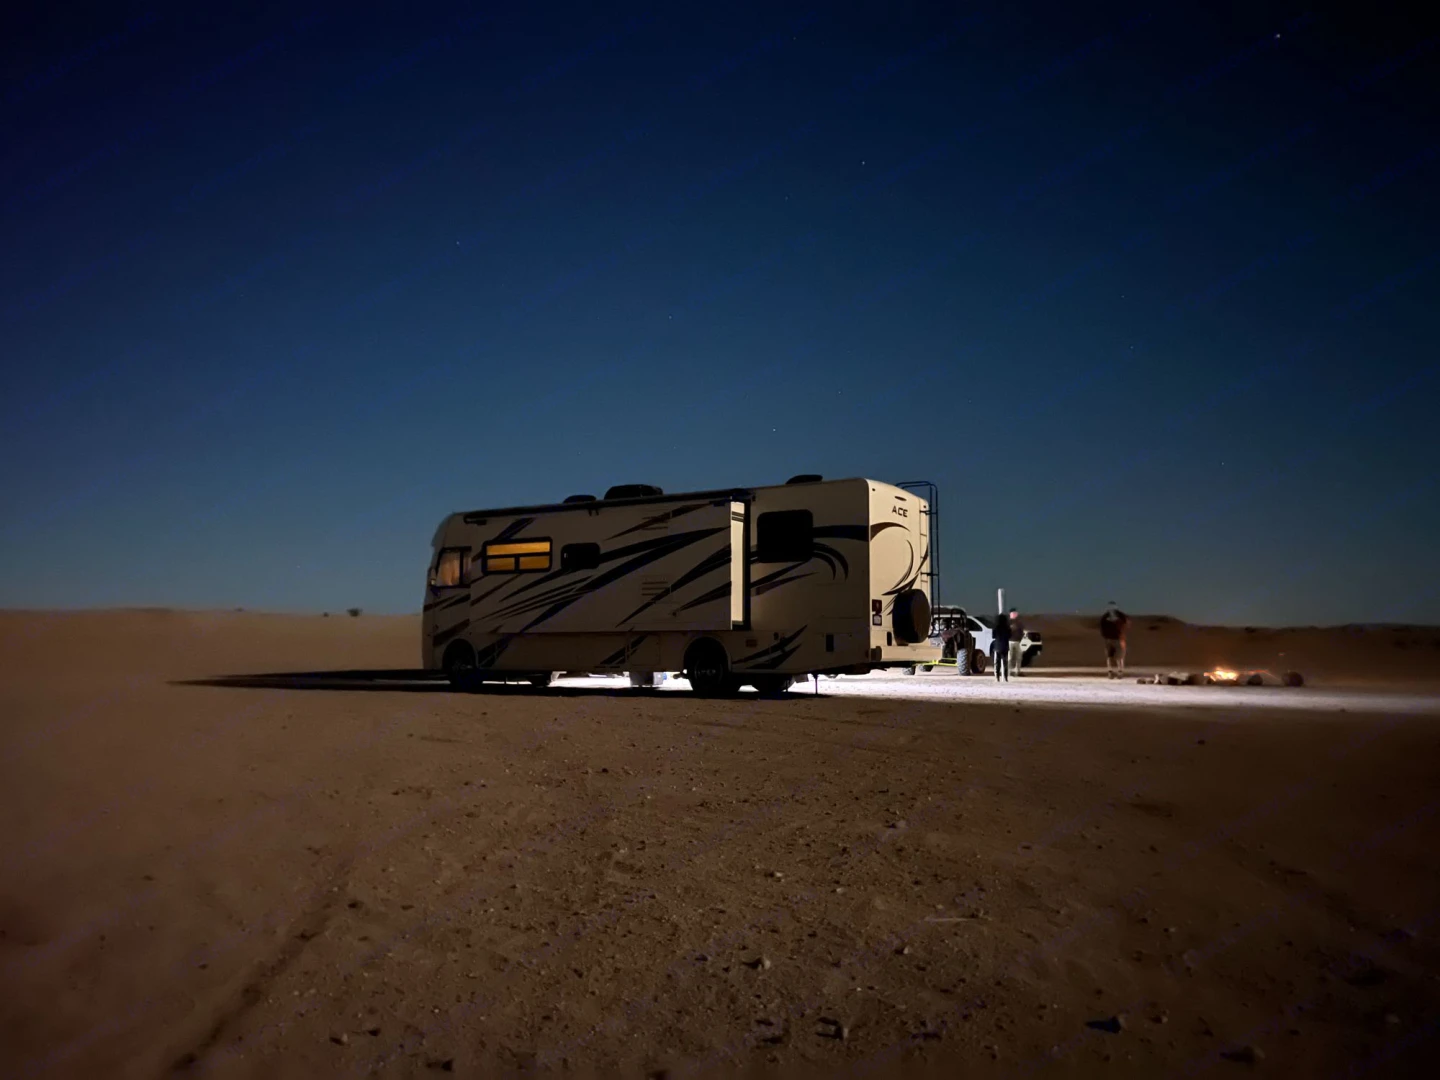 Built for desert camping in Southern California